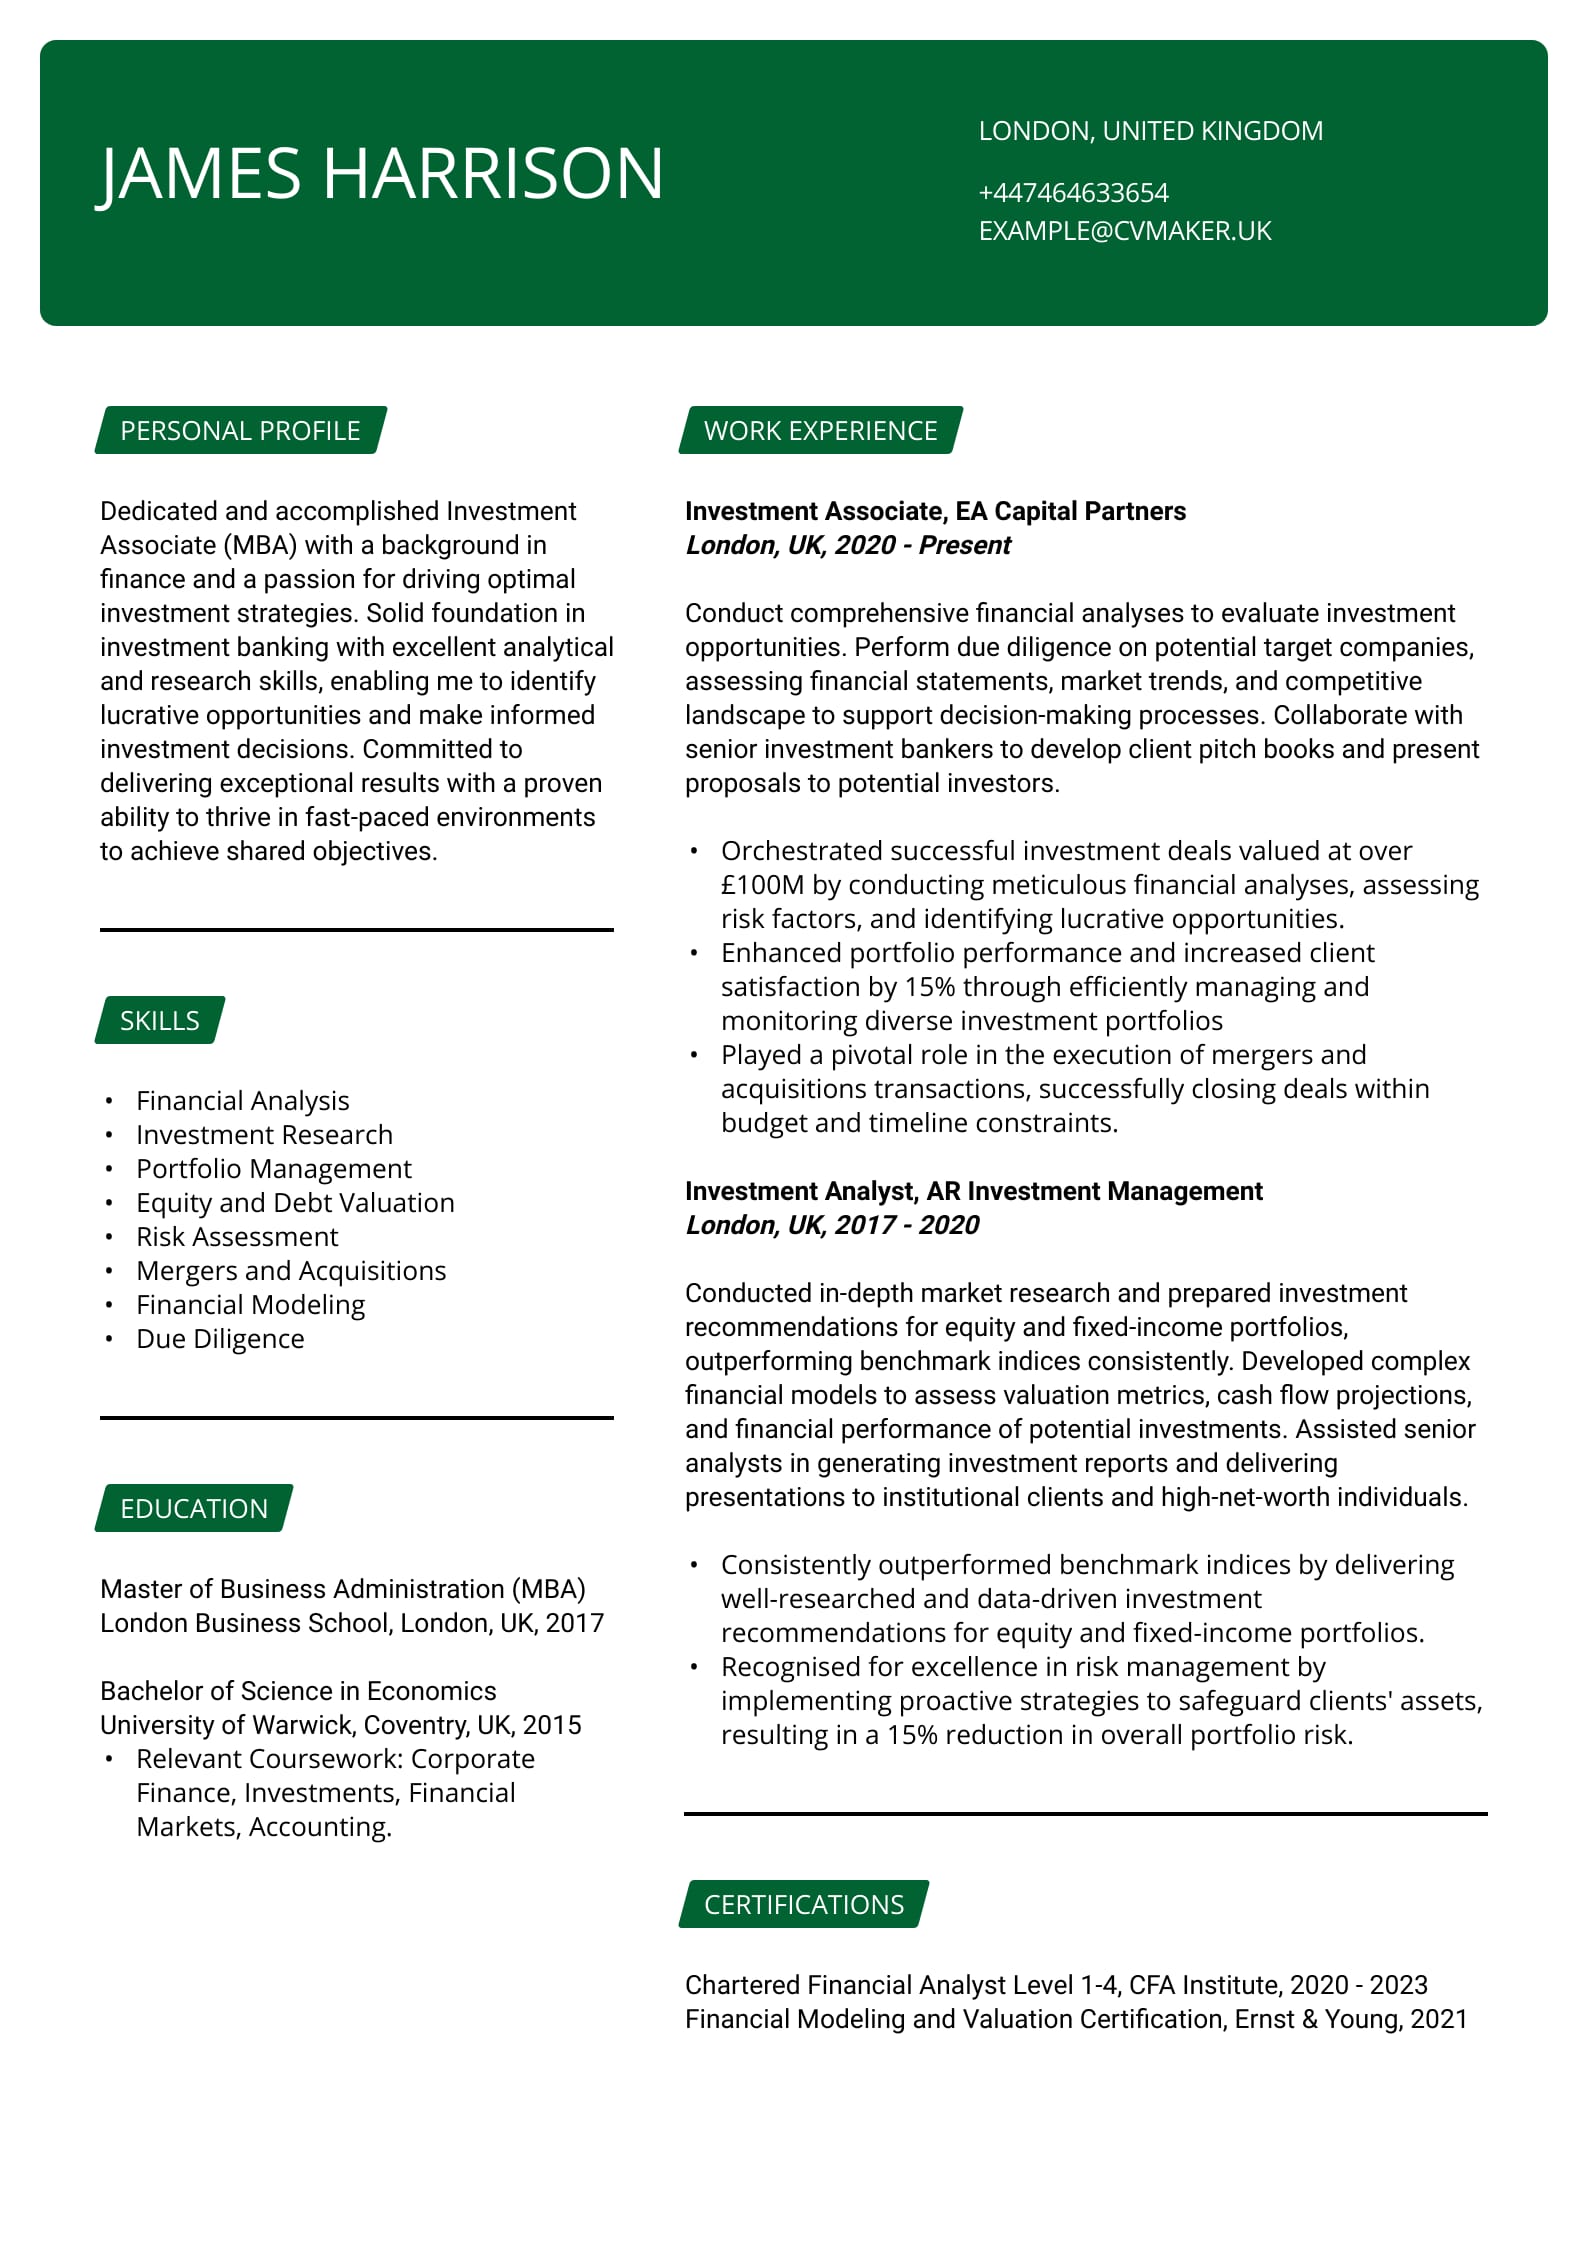 Investment banker CV example